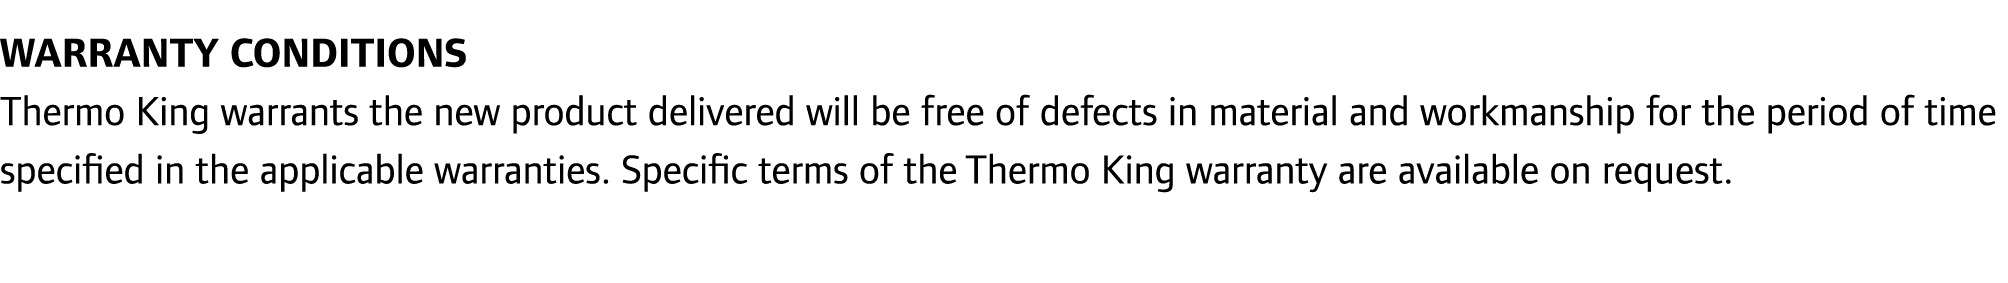 WARRANTY CONDITIONS Thermo King warrants the new product delivered will be free of defects in material and workmanshi...